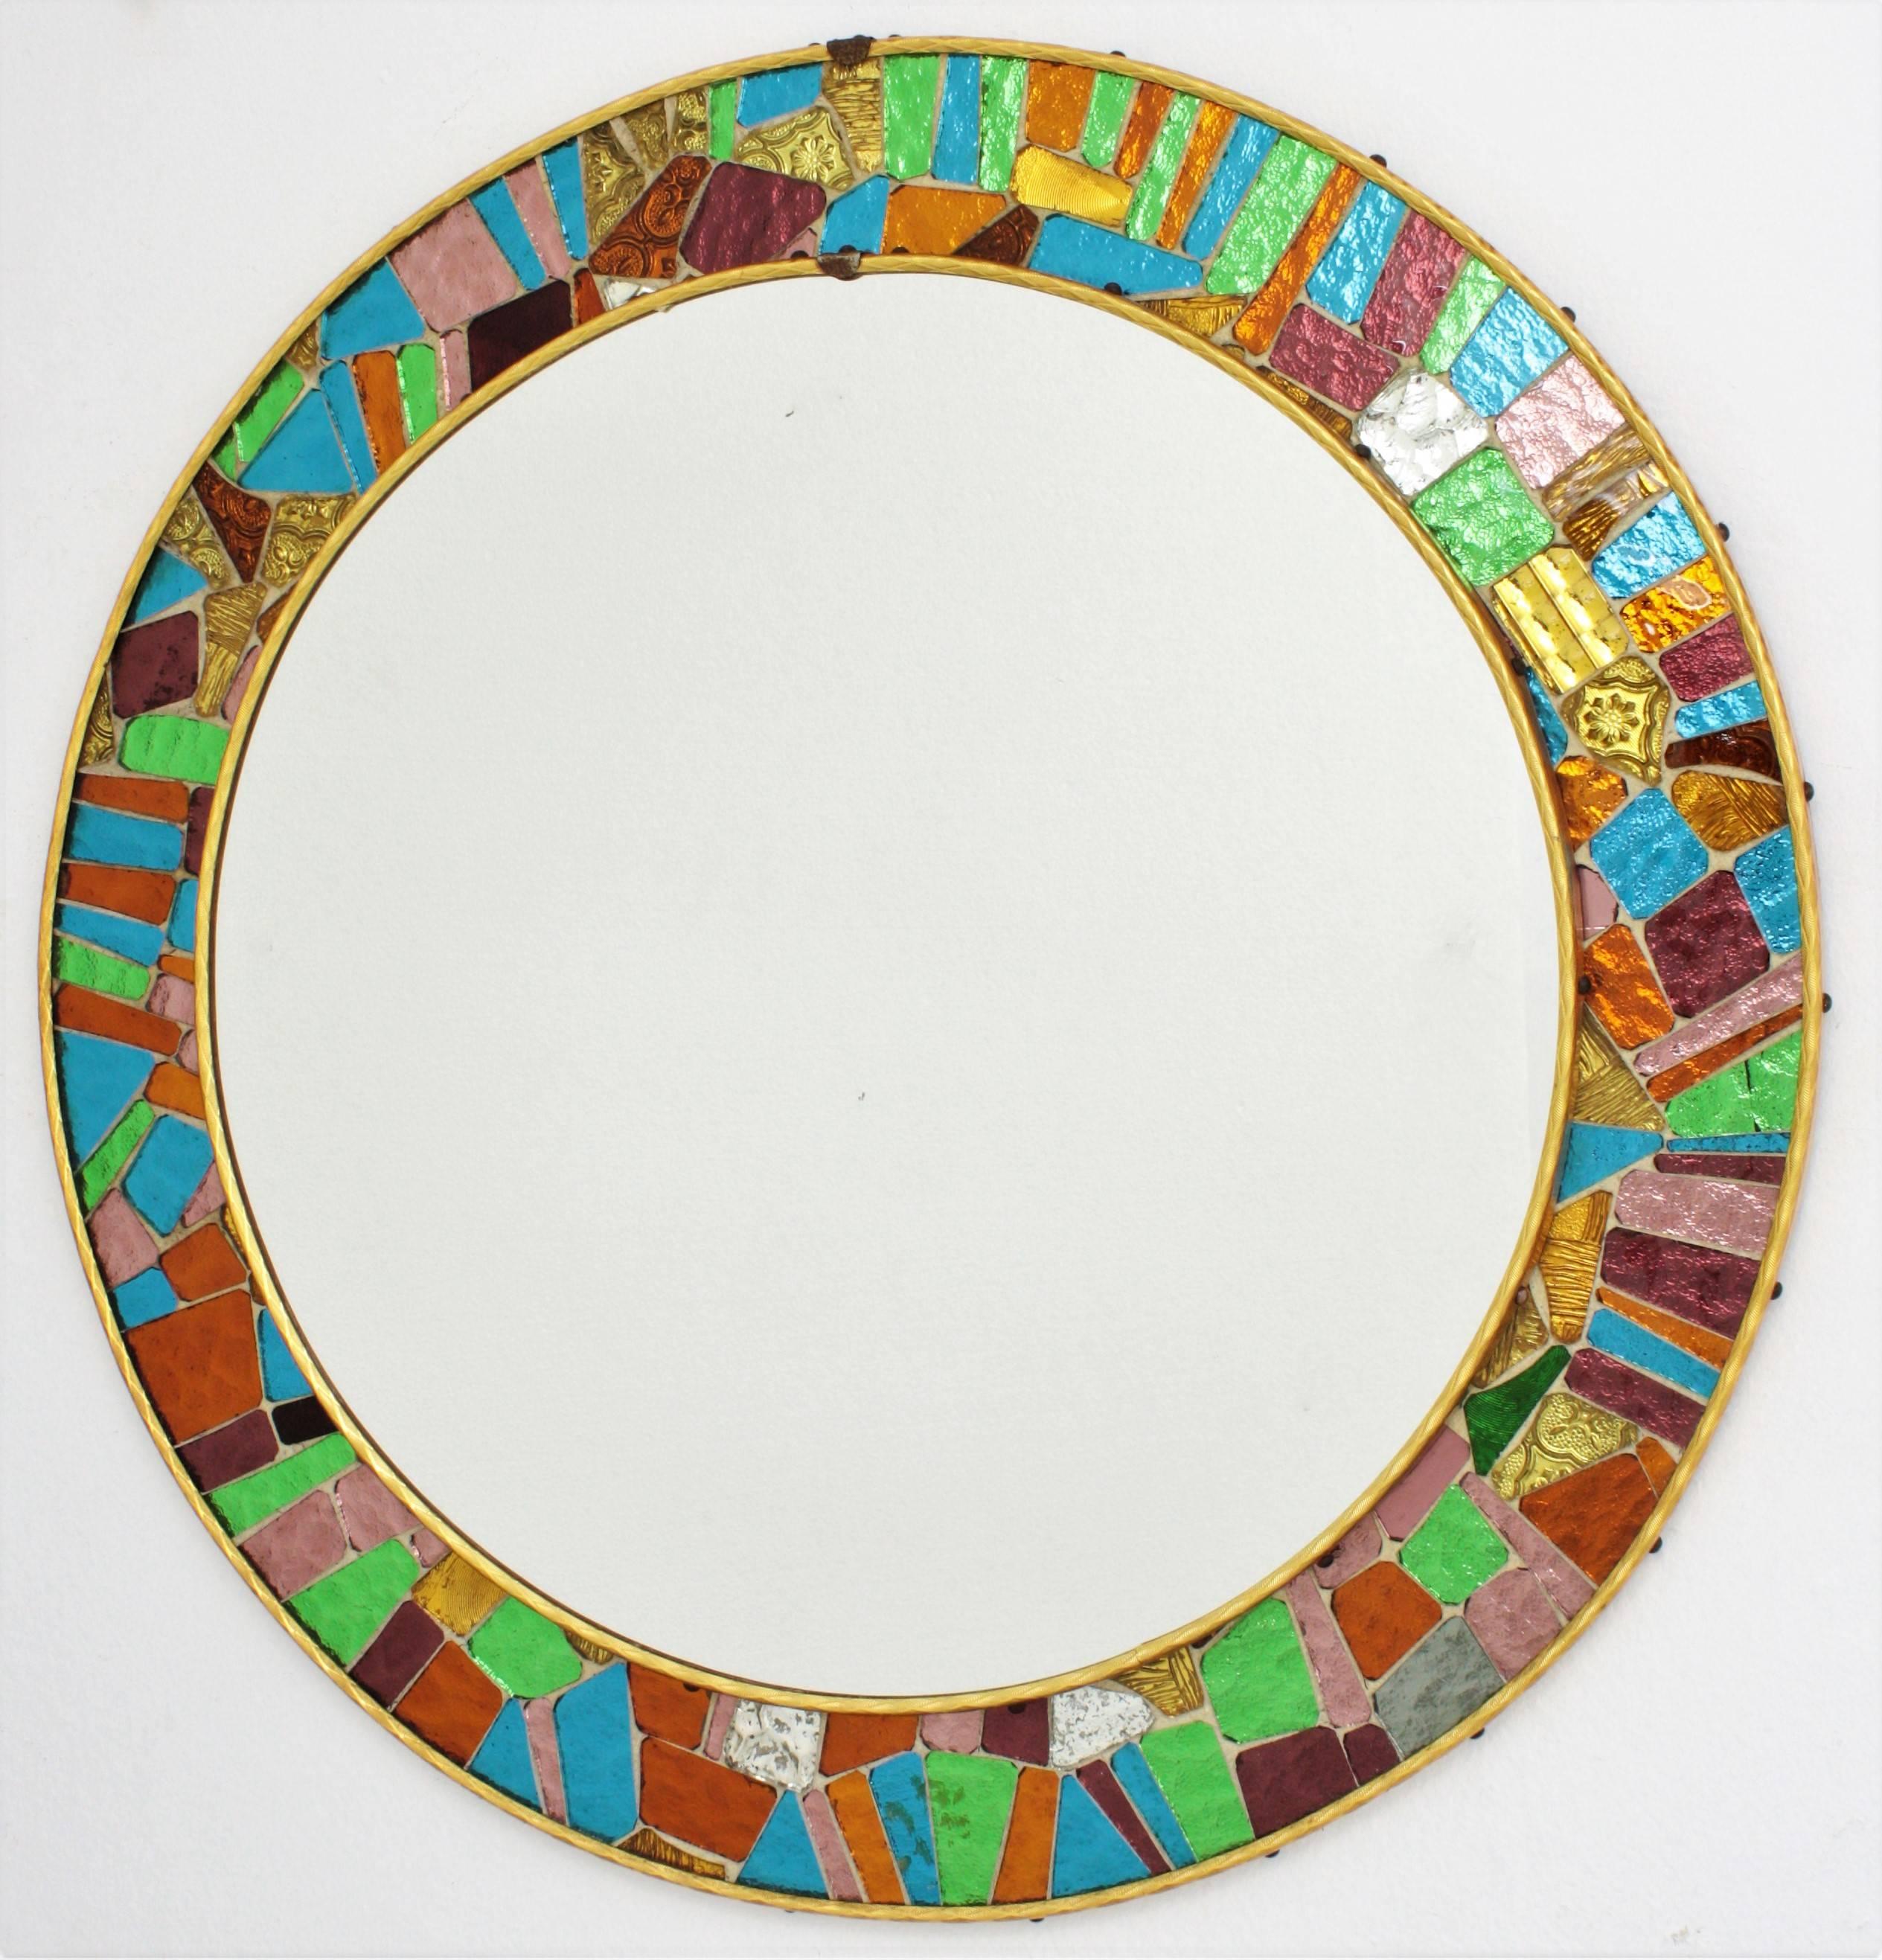 Amazing circular mirror from the mid-20th century period framed with small pieces of colorful mirrored glass creating an stunning mosaic frame. In the style of Gaudí Trencadís technique.
Small mirrored hand-cut-glass tiles in blue, green, gold,